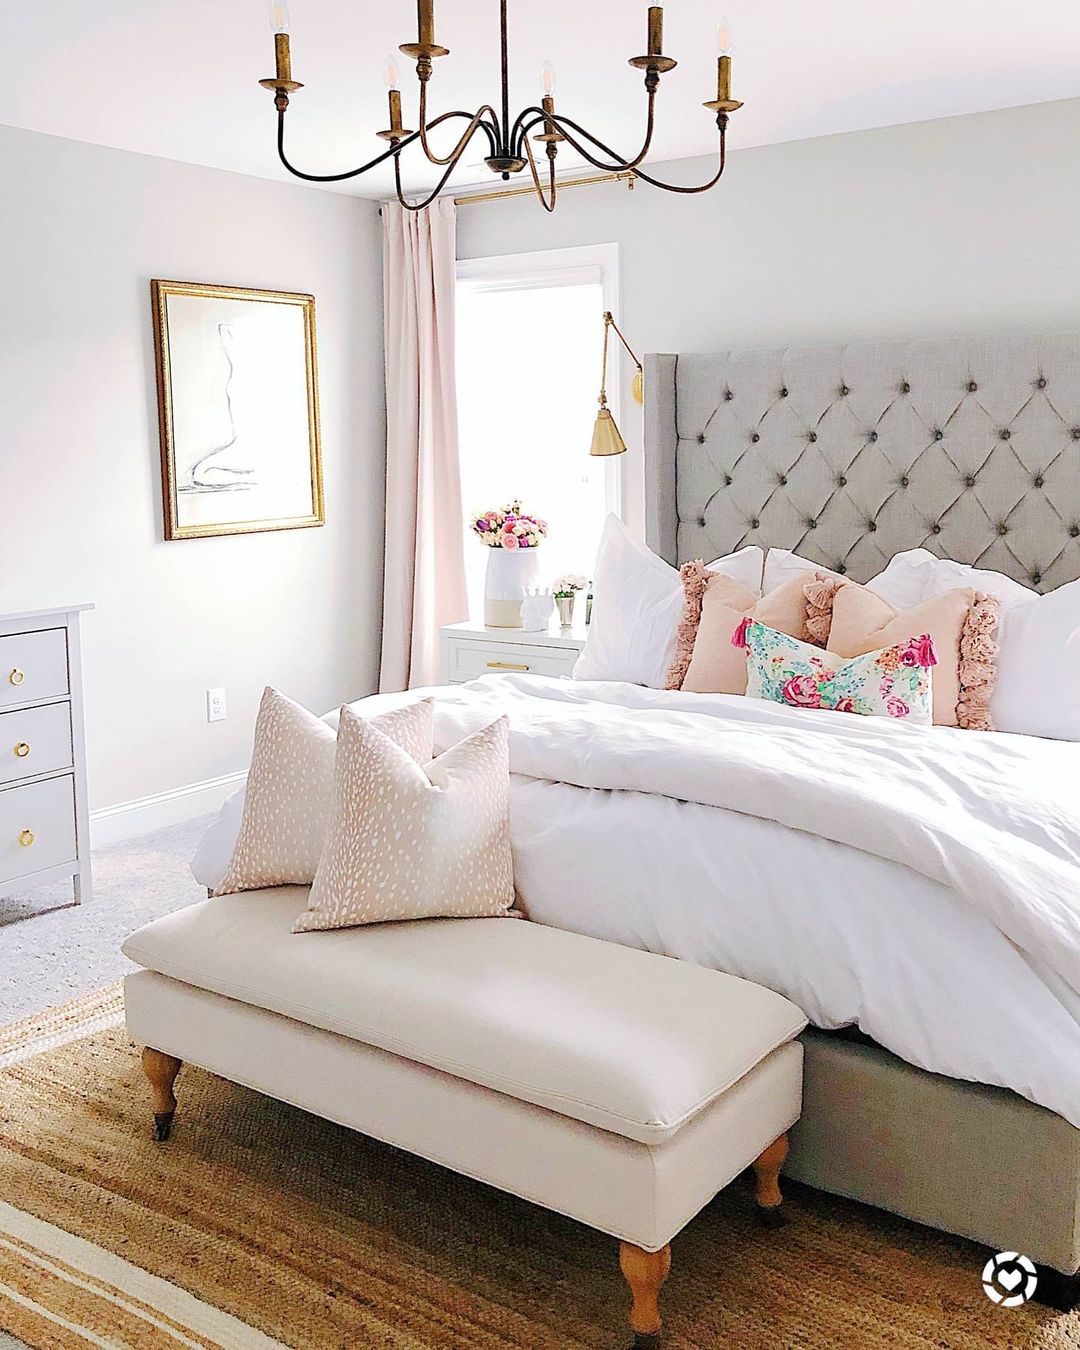 Off white upholstered bench at the foot of a tufted bed. Photo by Instagram user @theviewfromtobaccoroad